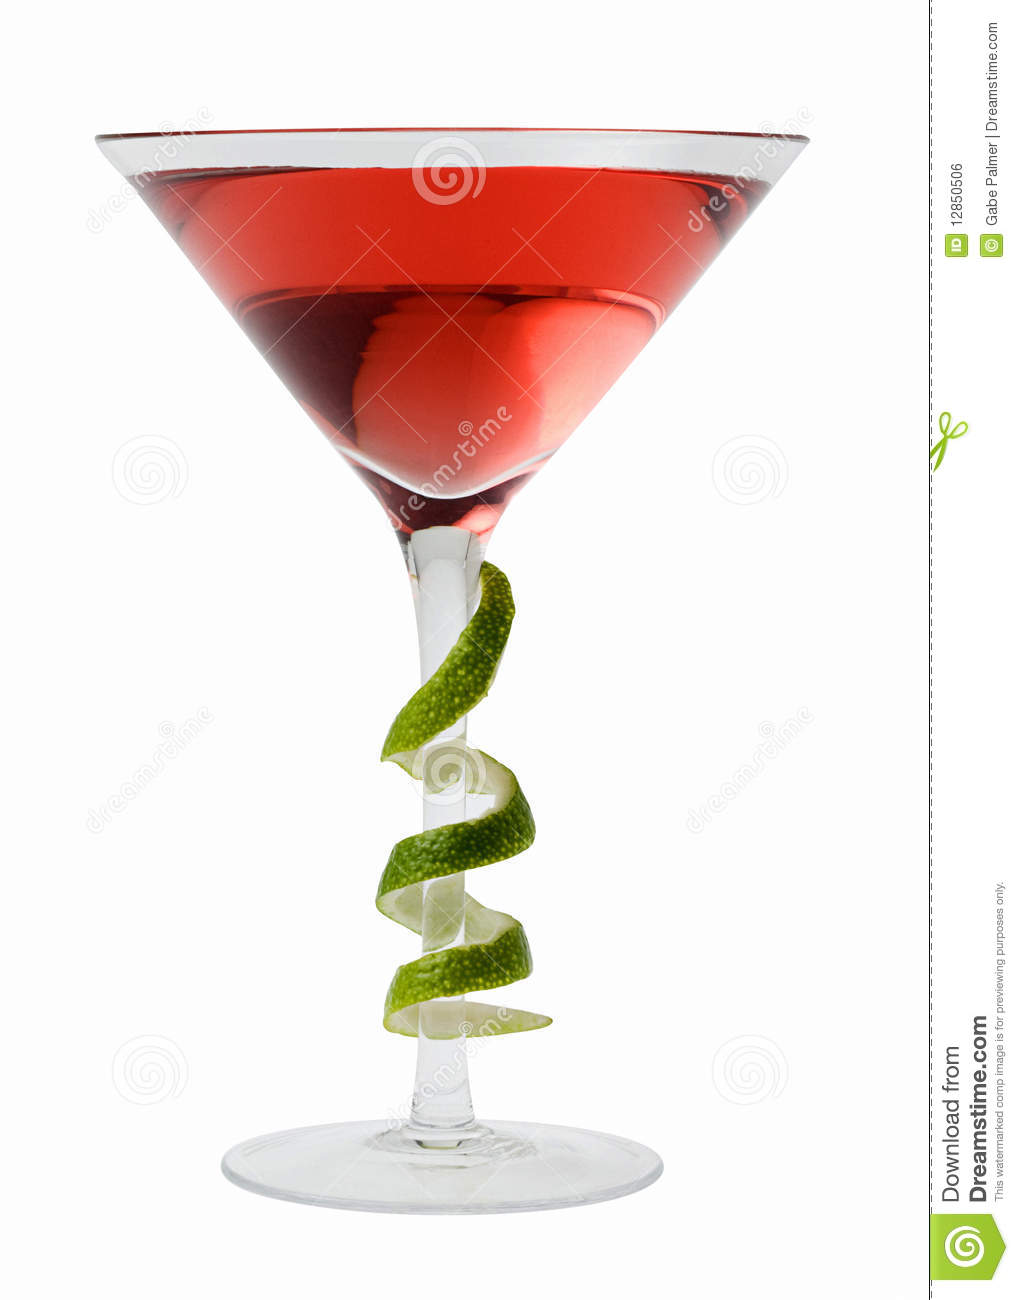 Similar Stock Images Of   Cosmopolitan Cocktail With Lime Garnish